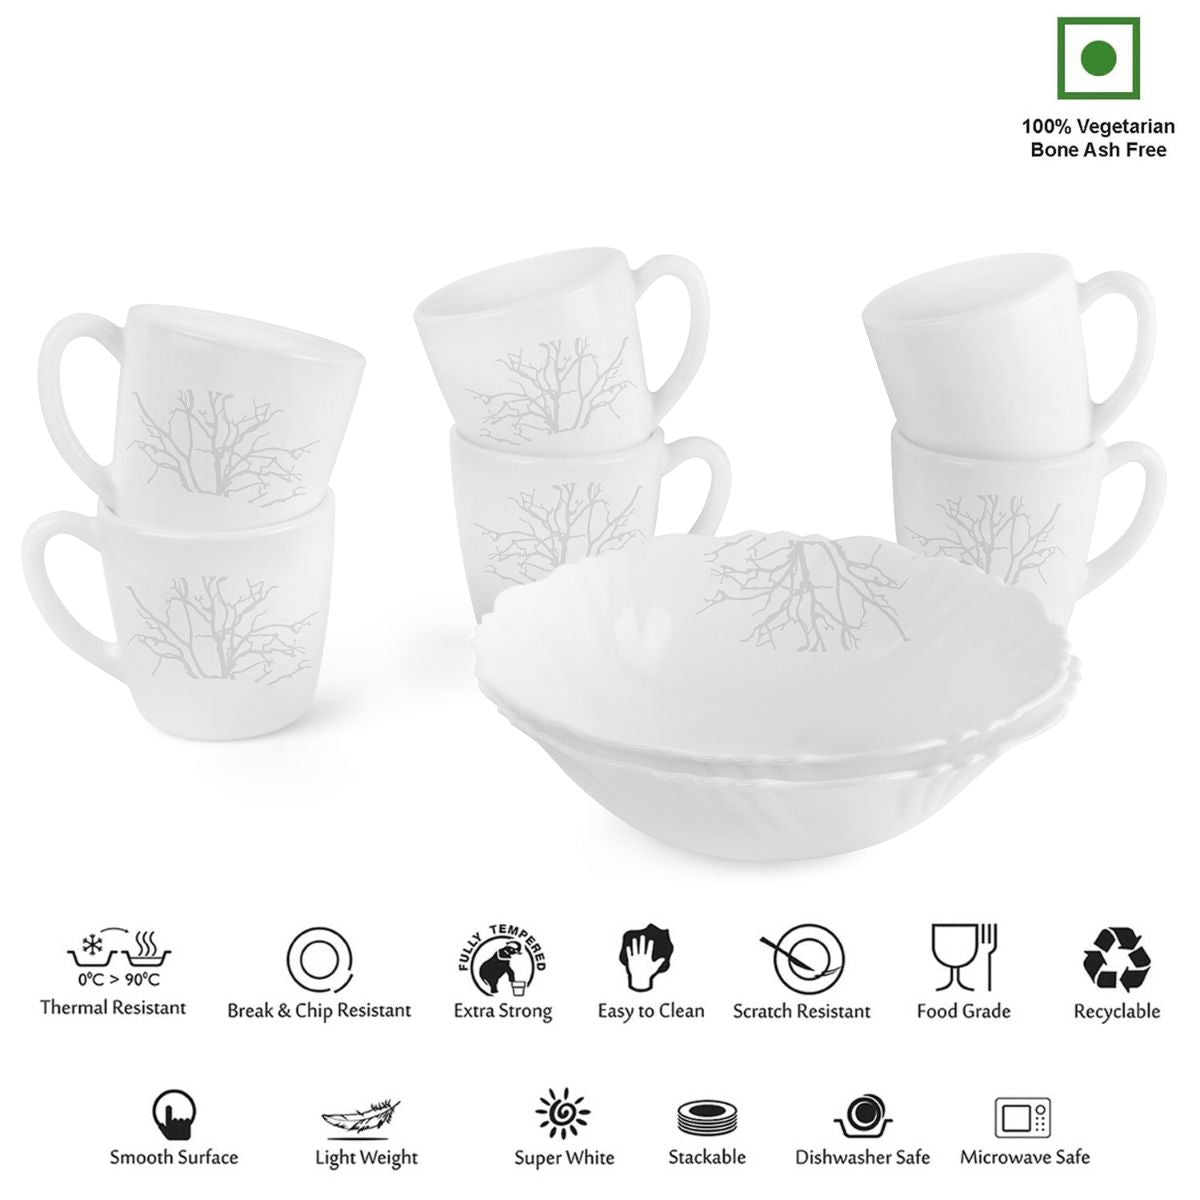 Imperial Series Quick Bite Bowl & Mug Gift set, 8 Pieces Winter Frost / 8 Pieces